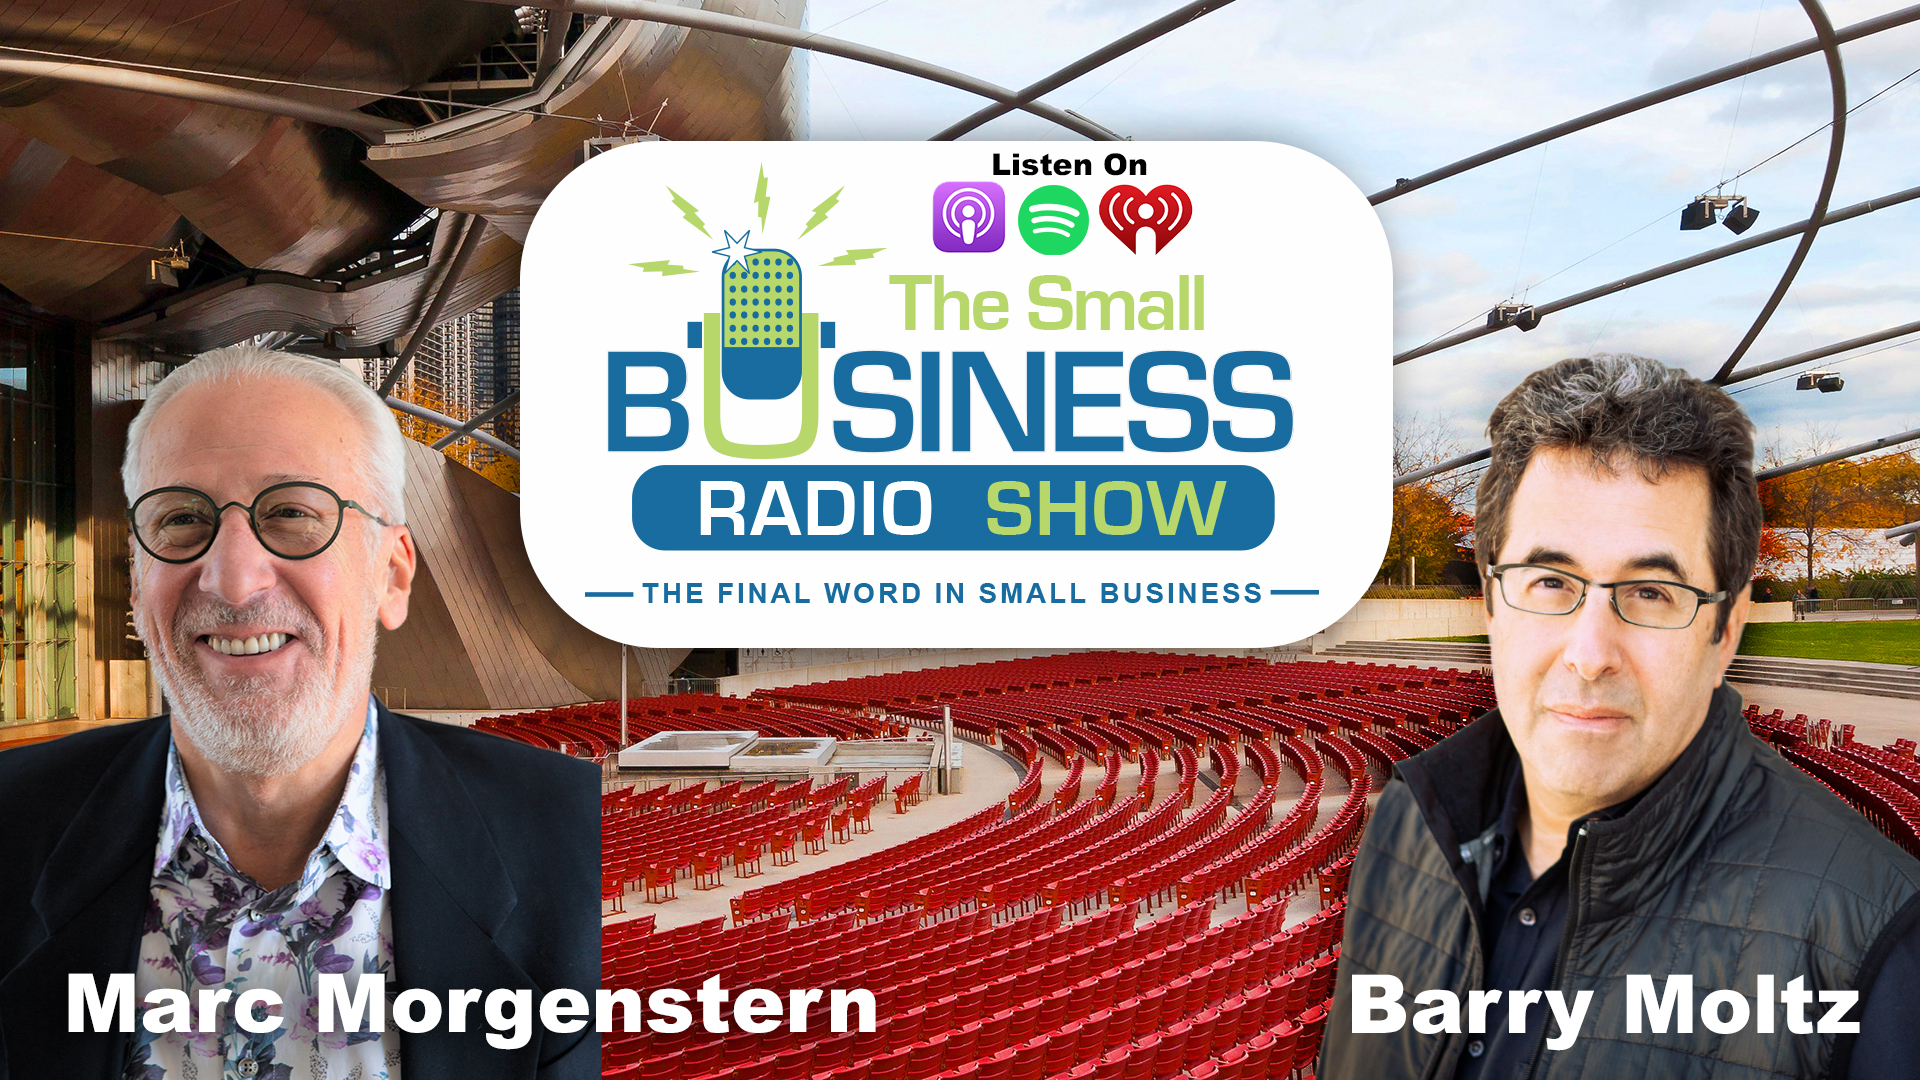 Marc Morgenstern on The Small Business Radio Show make a deal